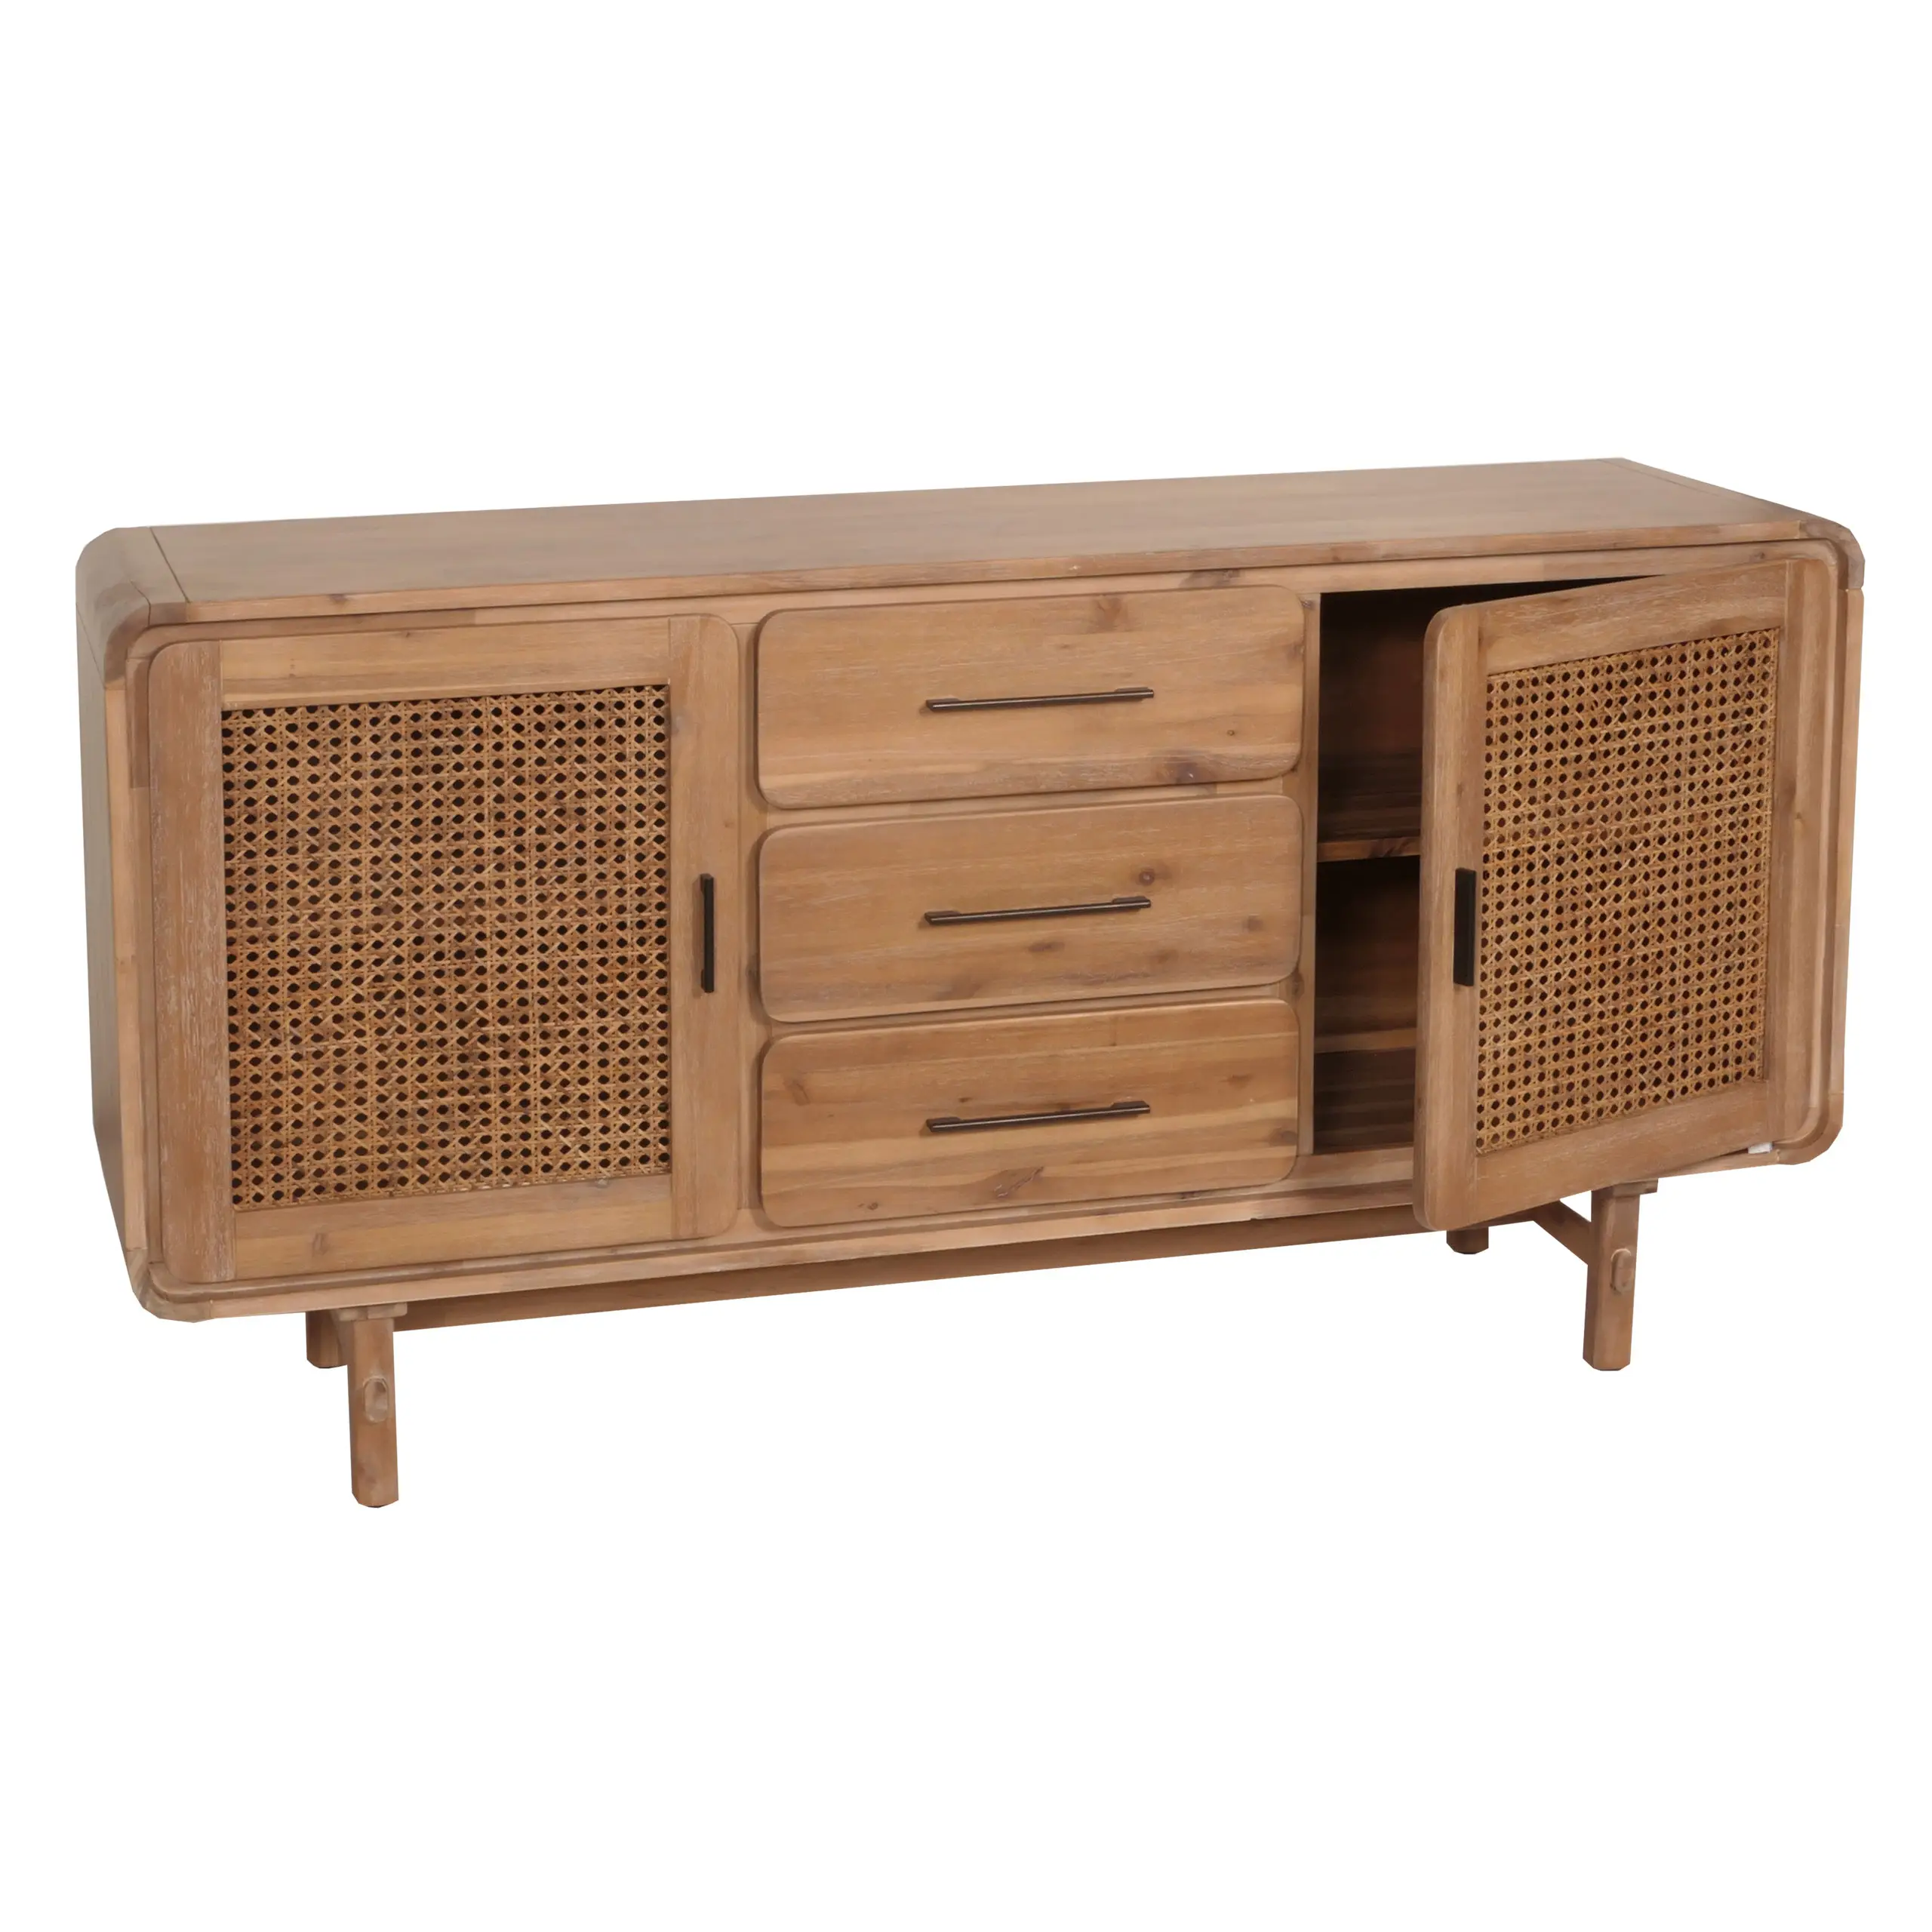 MCW-M47 Sideboard